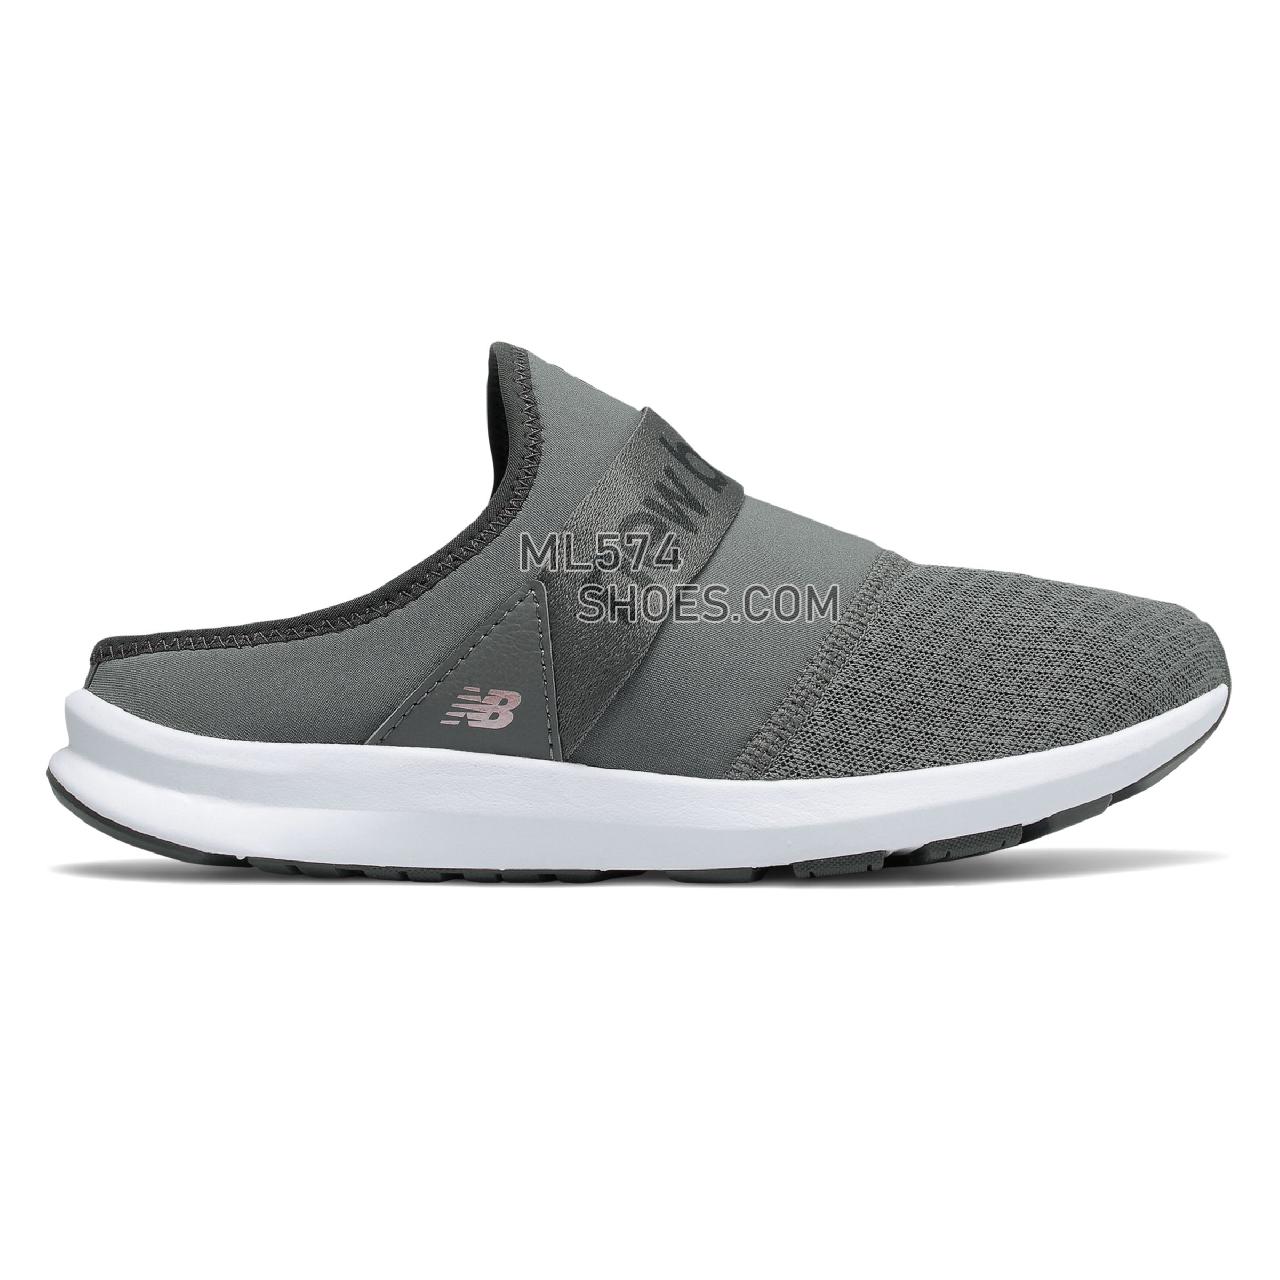 New Balance FuelCore Nergize Mule - Women's Sport Style Sneakers - Castlerock with Oyster Pink and Magnet - WLNRMLC1